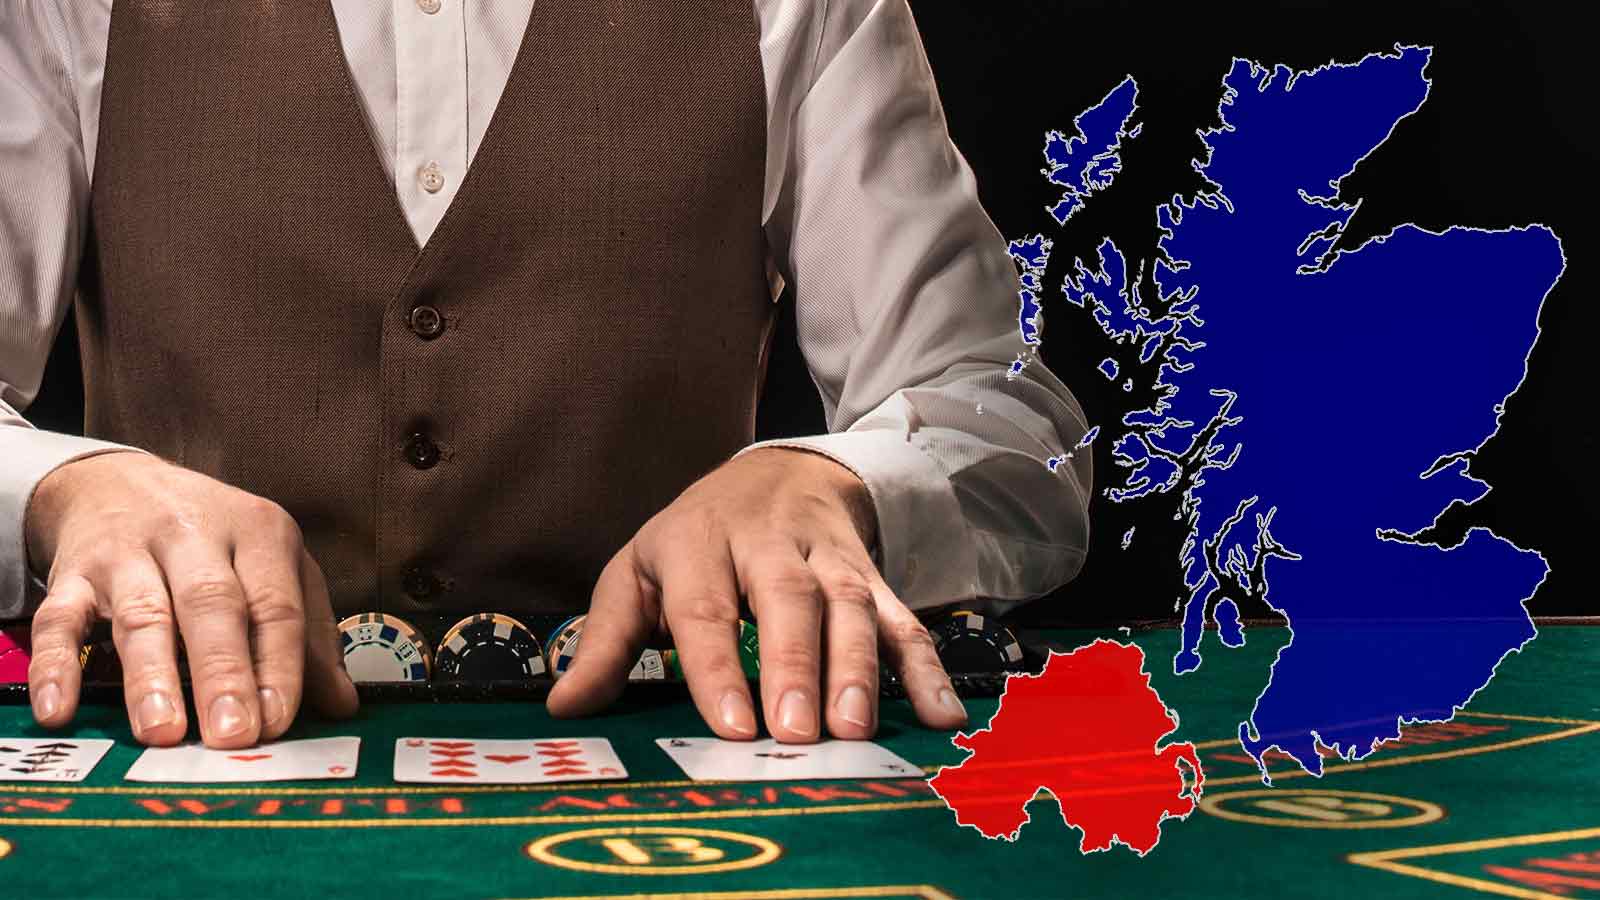 Common gambling types in Scotland and Northern Ireland